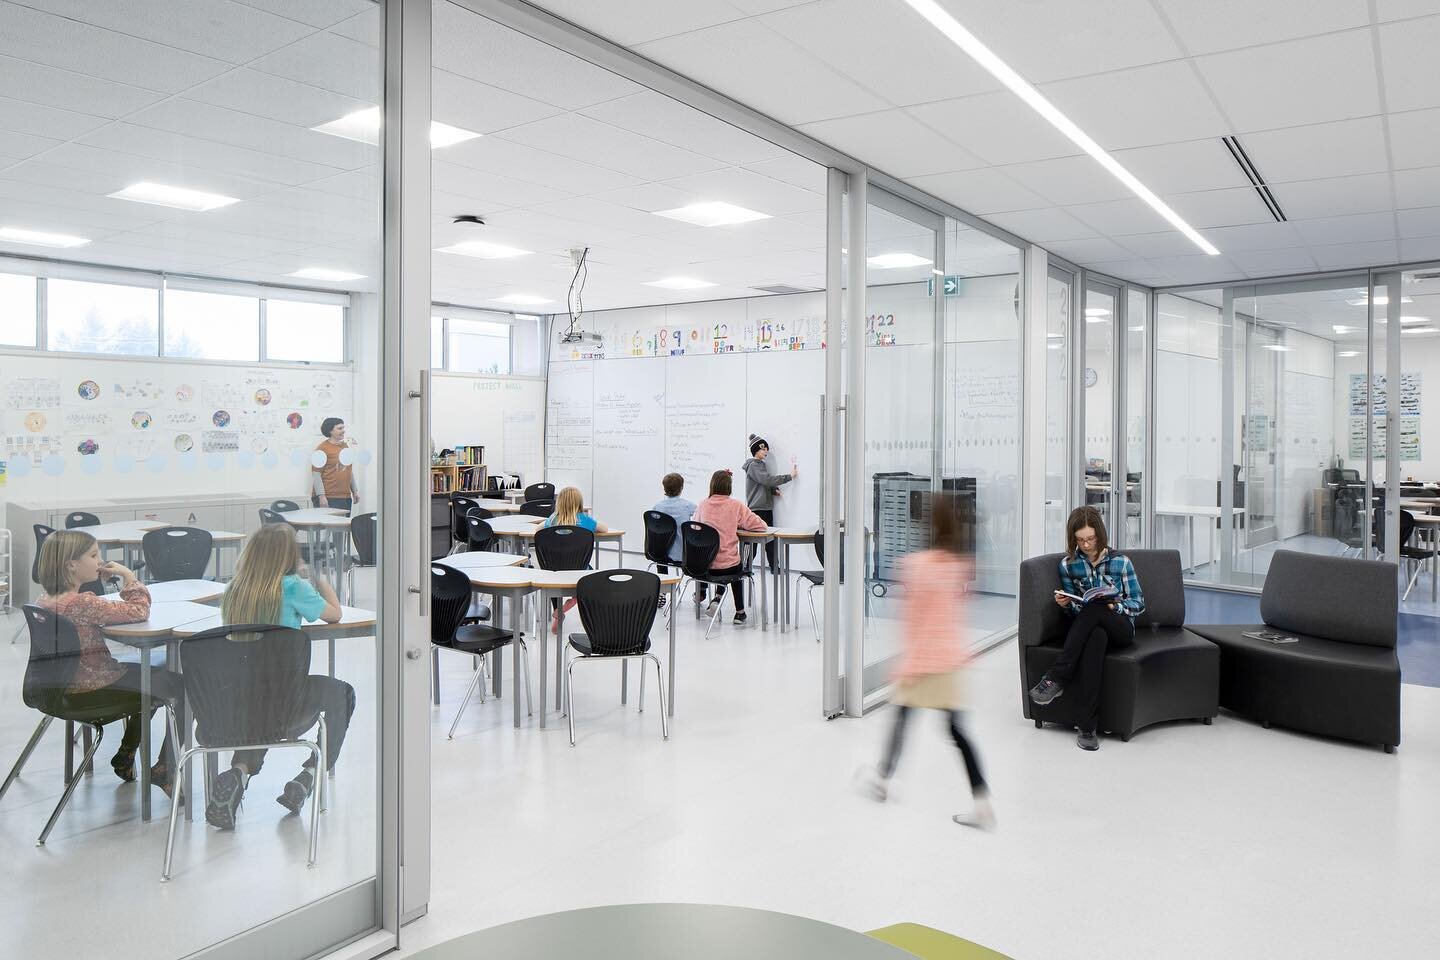 Presenting rapid interior construction at its finest. 

With school back in motion, this is the time to showcase our stunning reformation of Don Ross Middle School. Within the time stamp of 5 months, we helped transform a 70-year-old building into a 